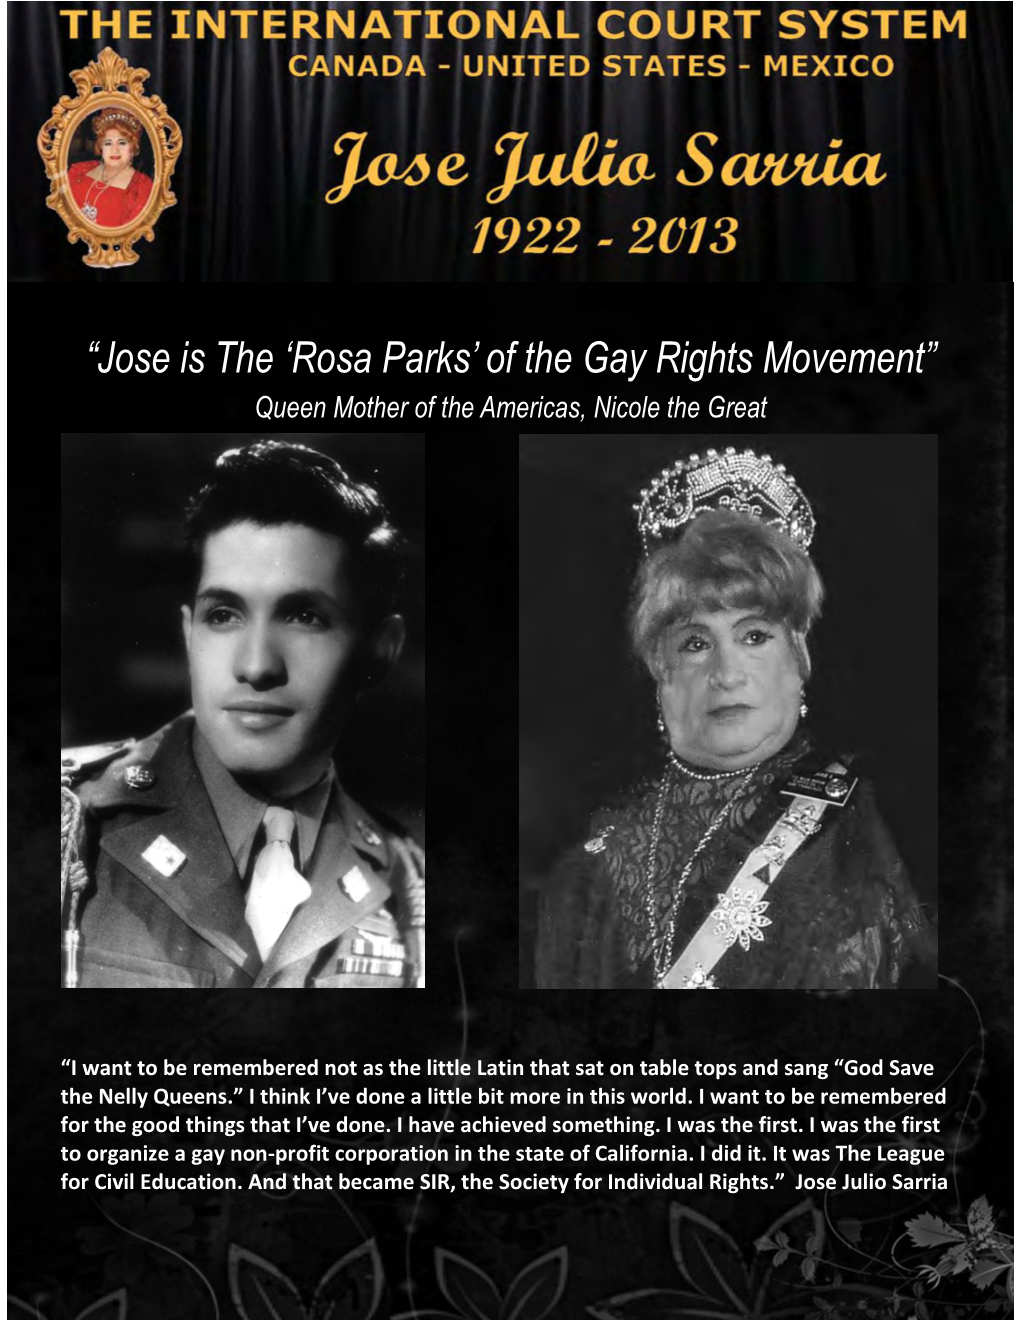 “Jose Is the 'Rosa Parks' of the Gay Rights Movement”